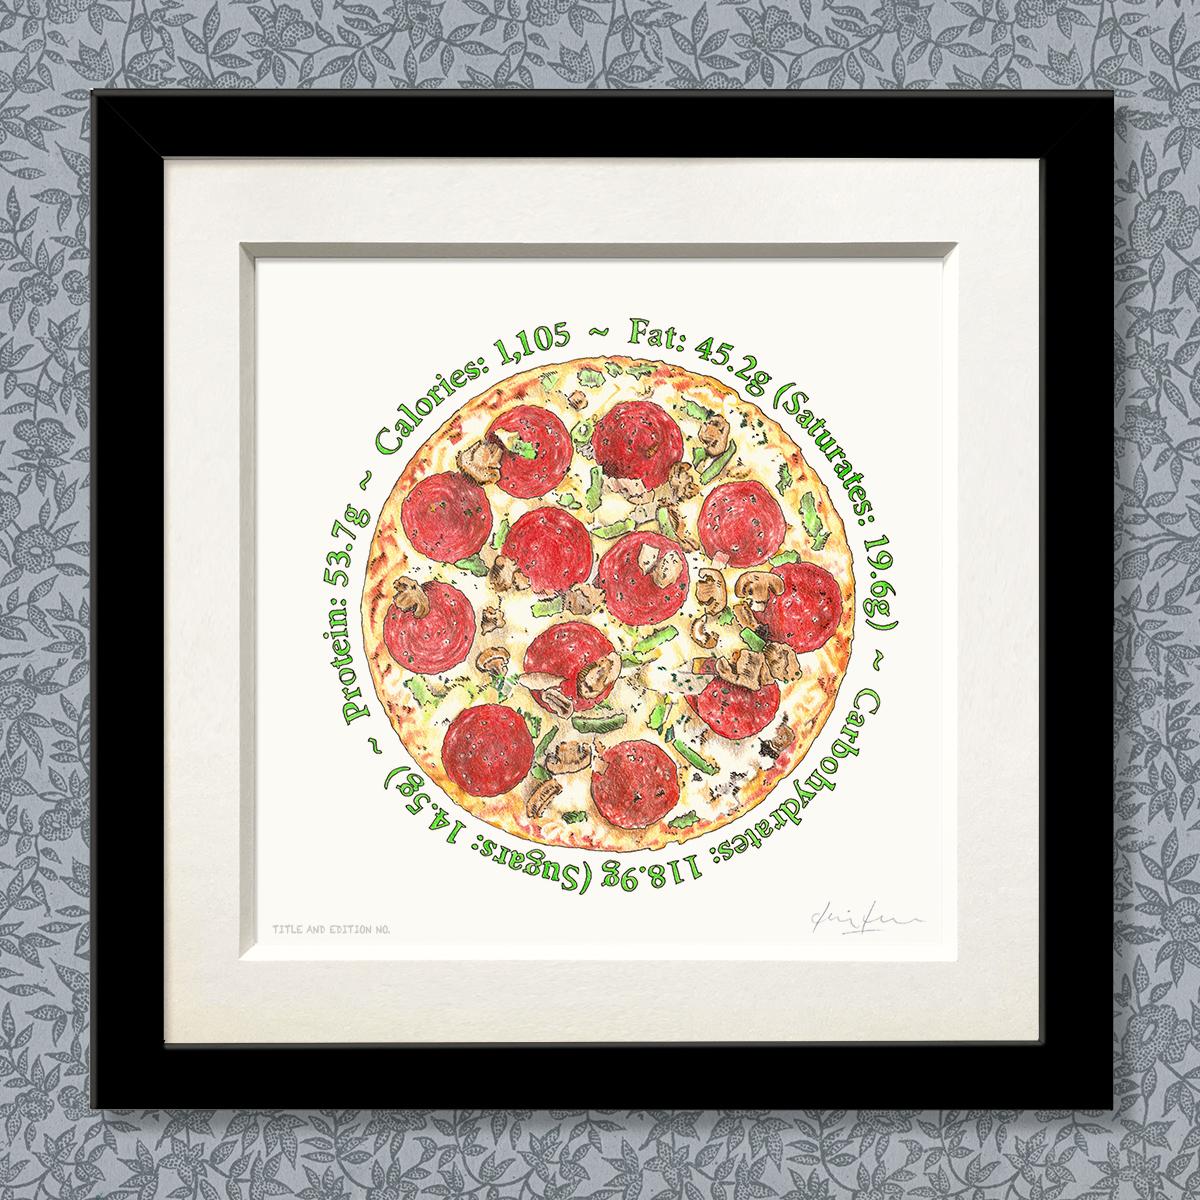 Limited edition print of coloured drawing of pizza, in a black frame.